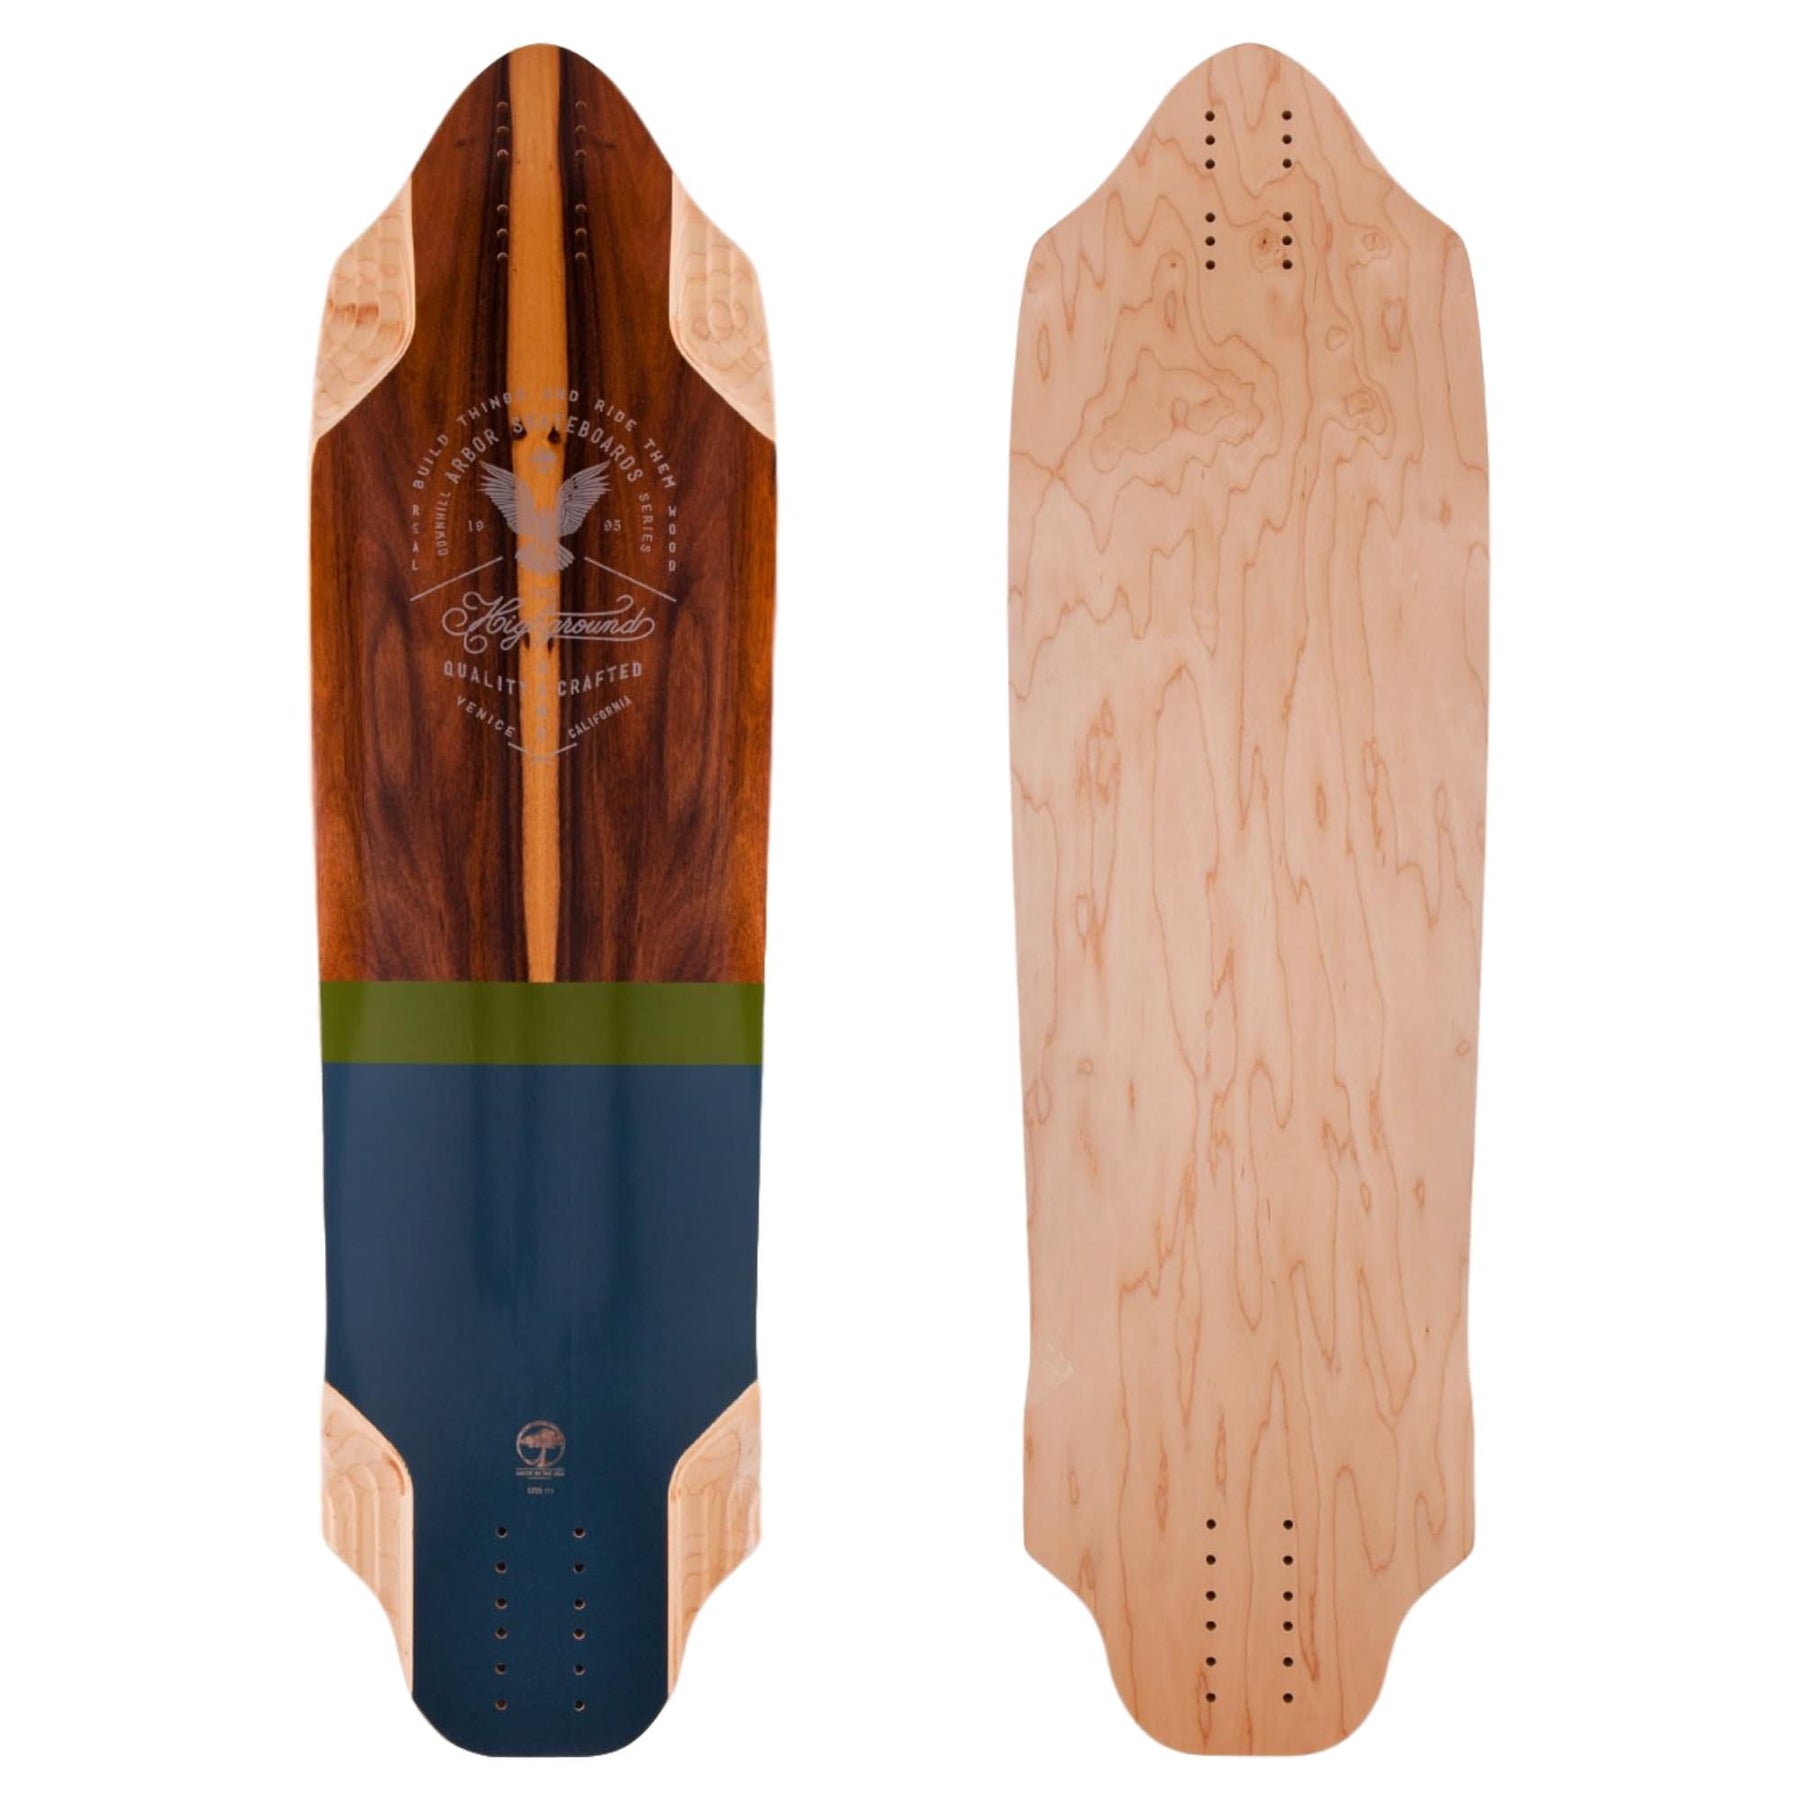 Arbor Highground Longboard, Deck and Complete